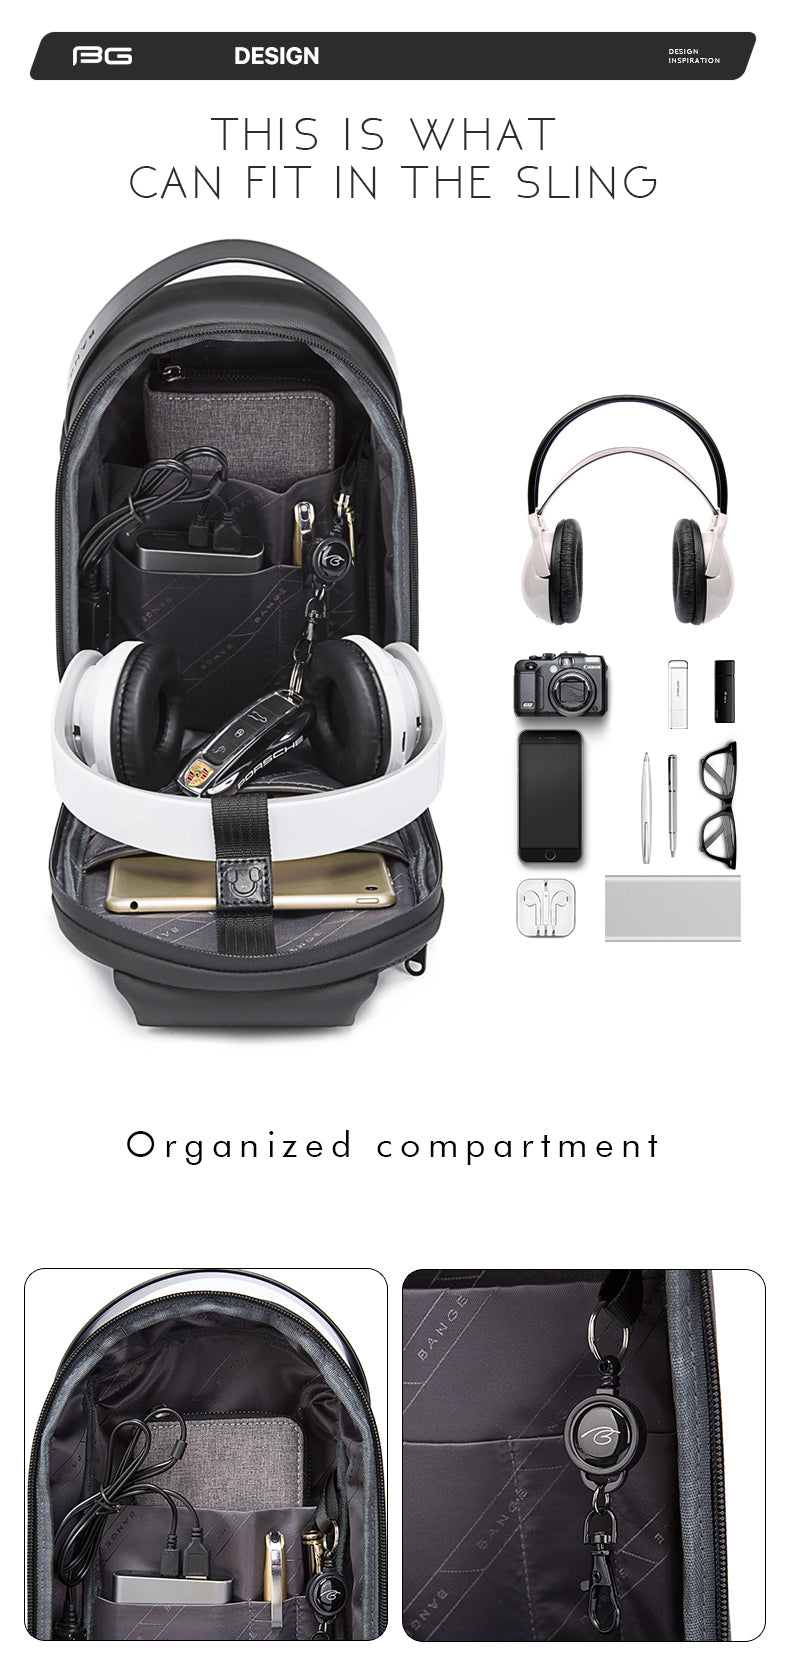 All things can be well organized in this sling bag.